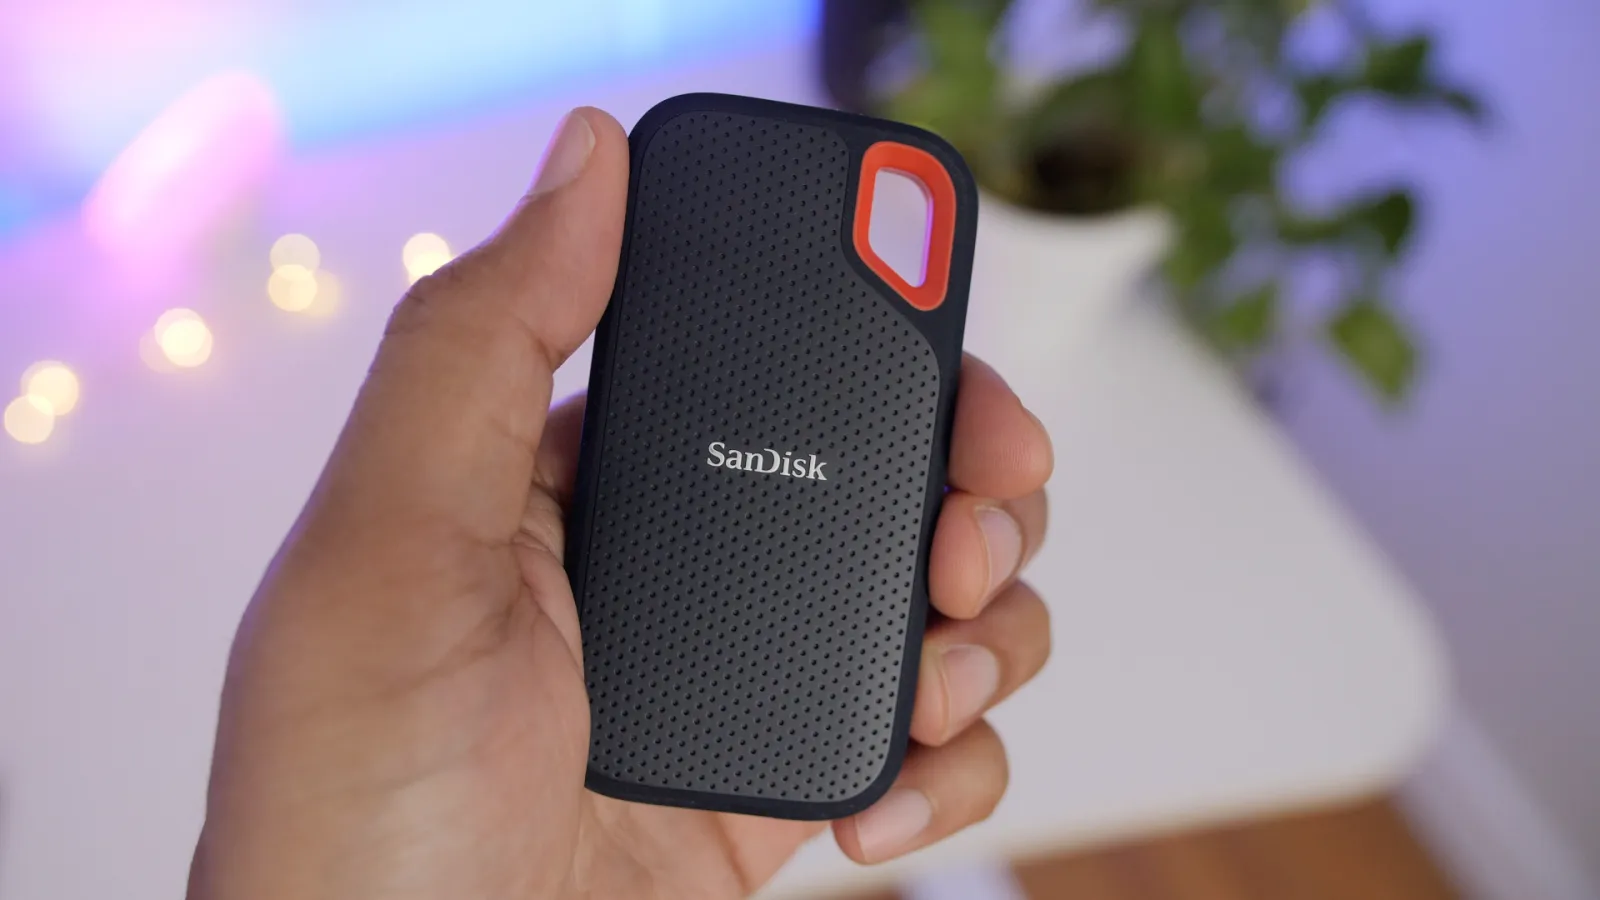 How To Format SanDisk Extreme Portable SSD For Windows